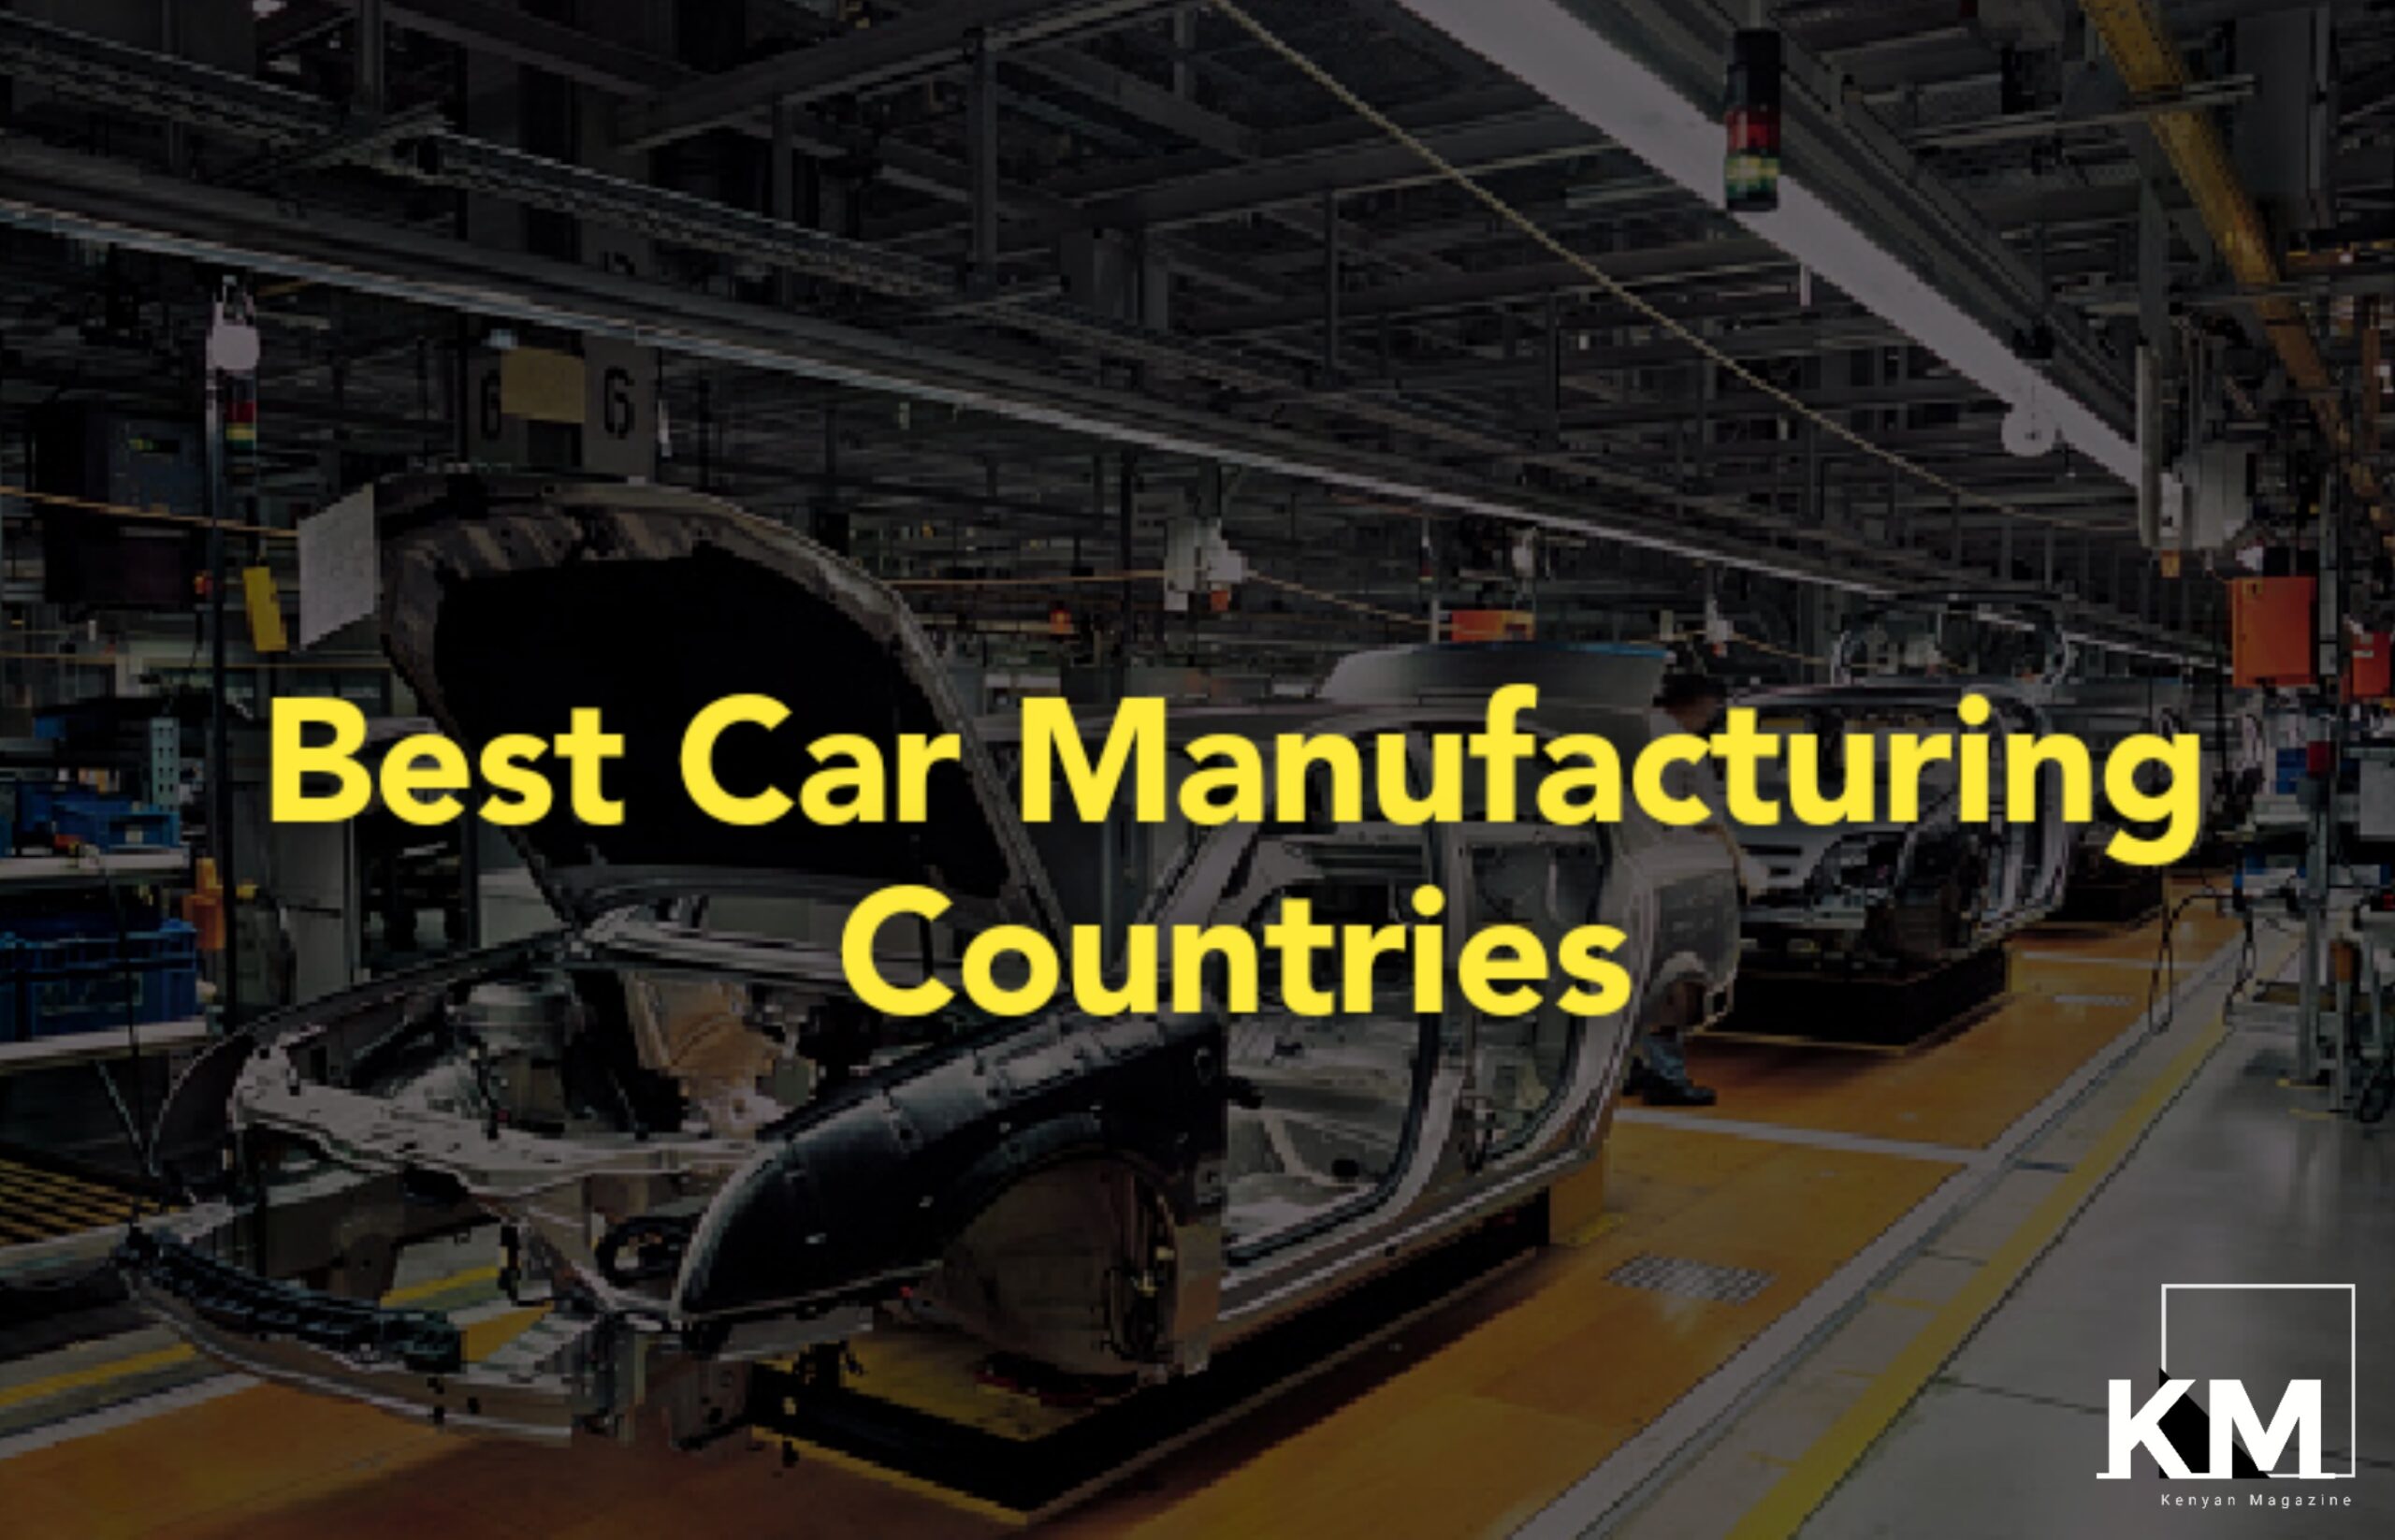 Best Car Manufacturing Countries